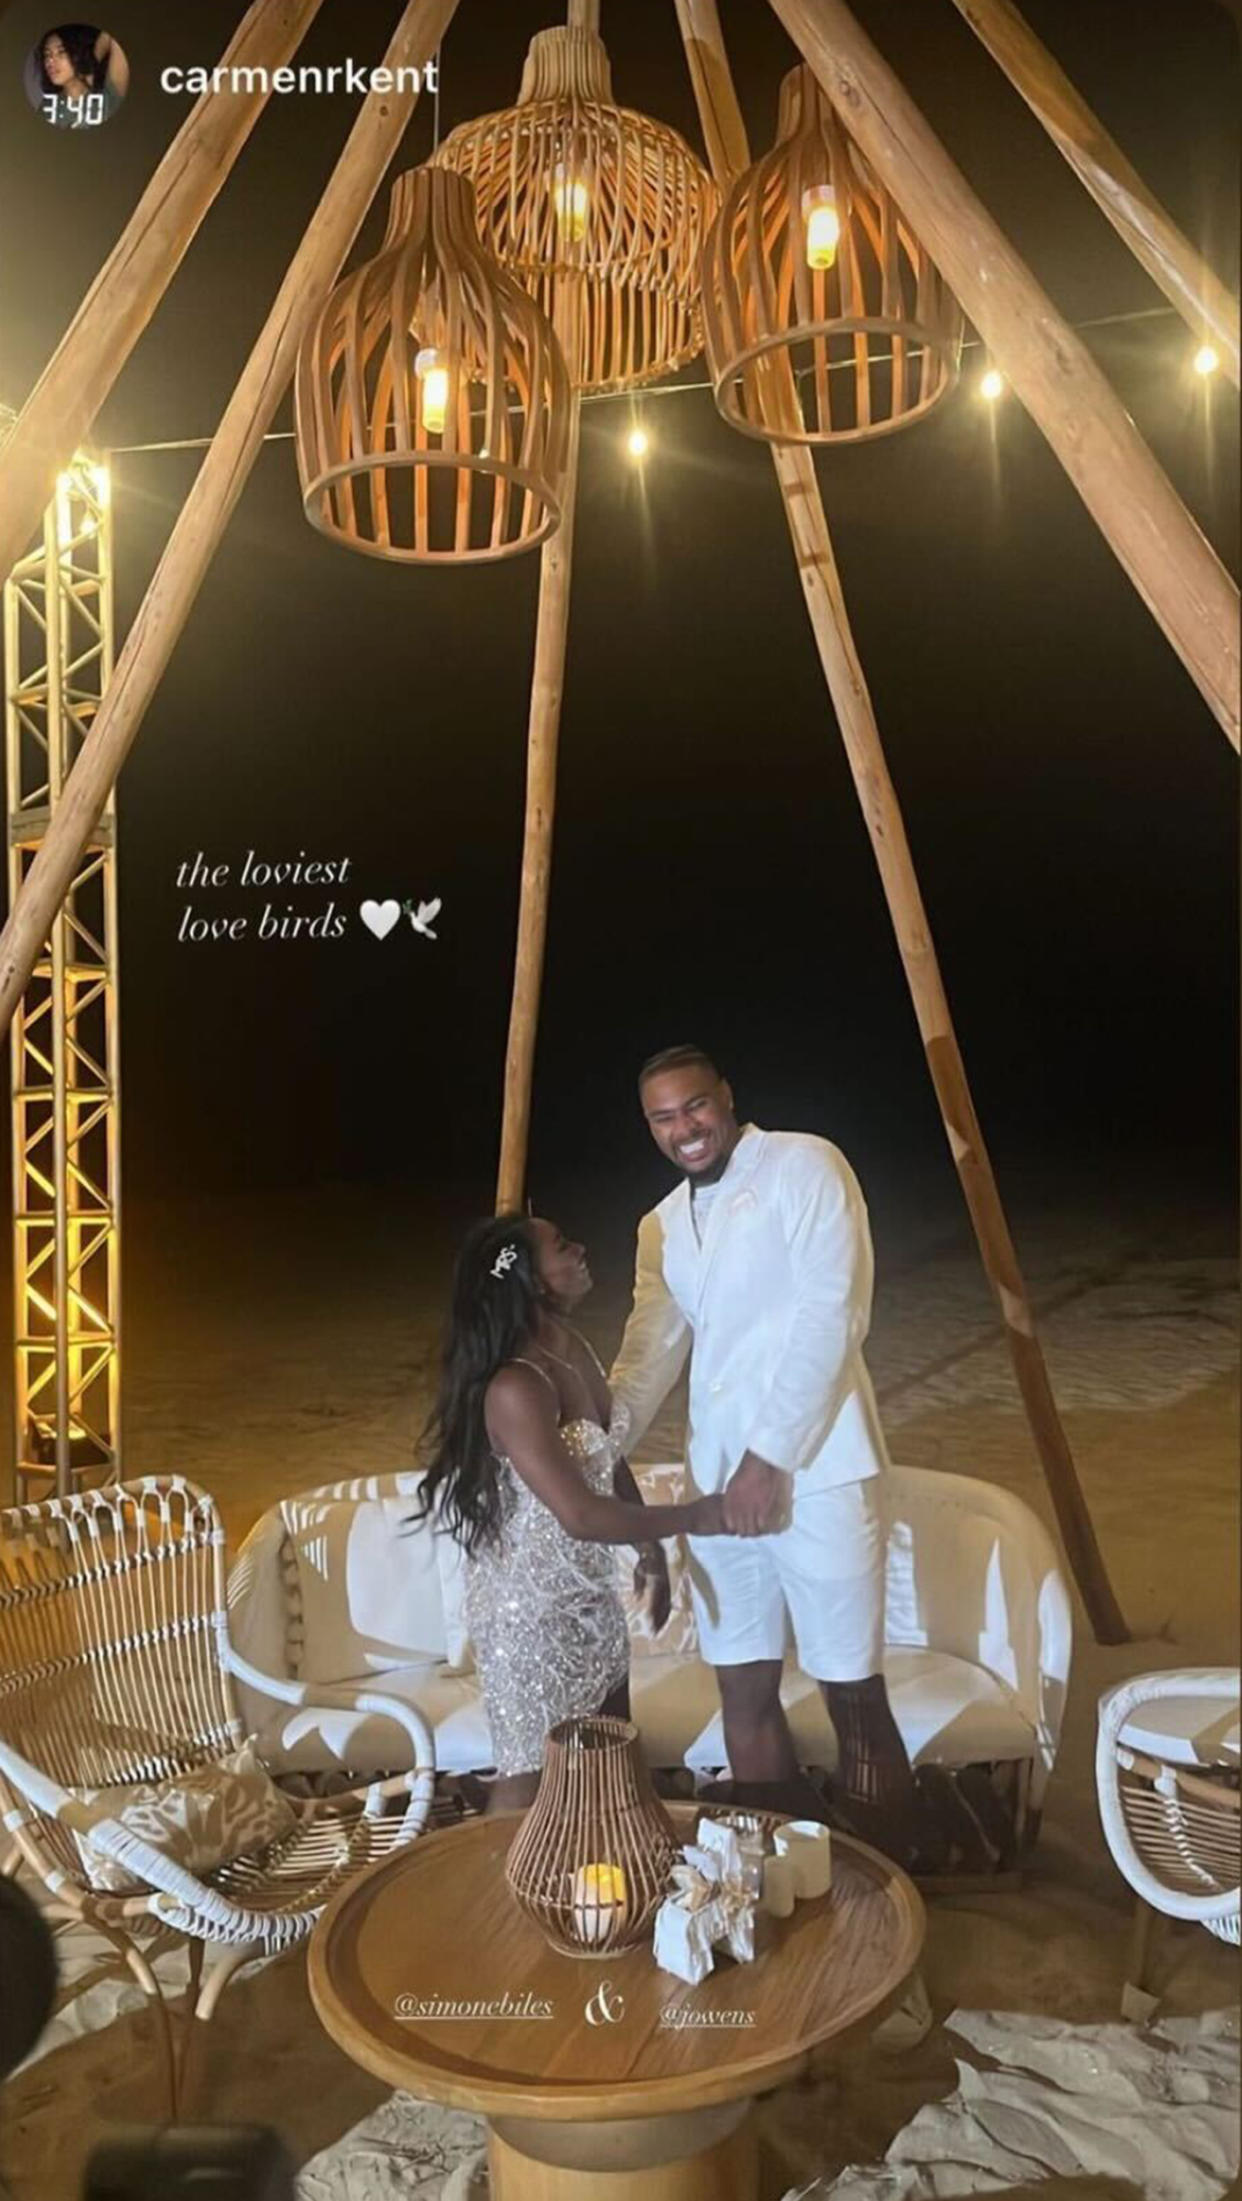 Simone Biles Owens and Jonathan Owens are having a great time at the welcome party to kick off their wedding weekend!  (carmenrkent / Instagram)